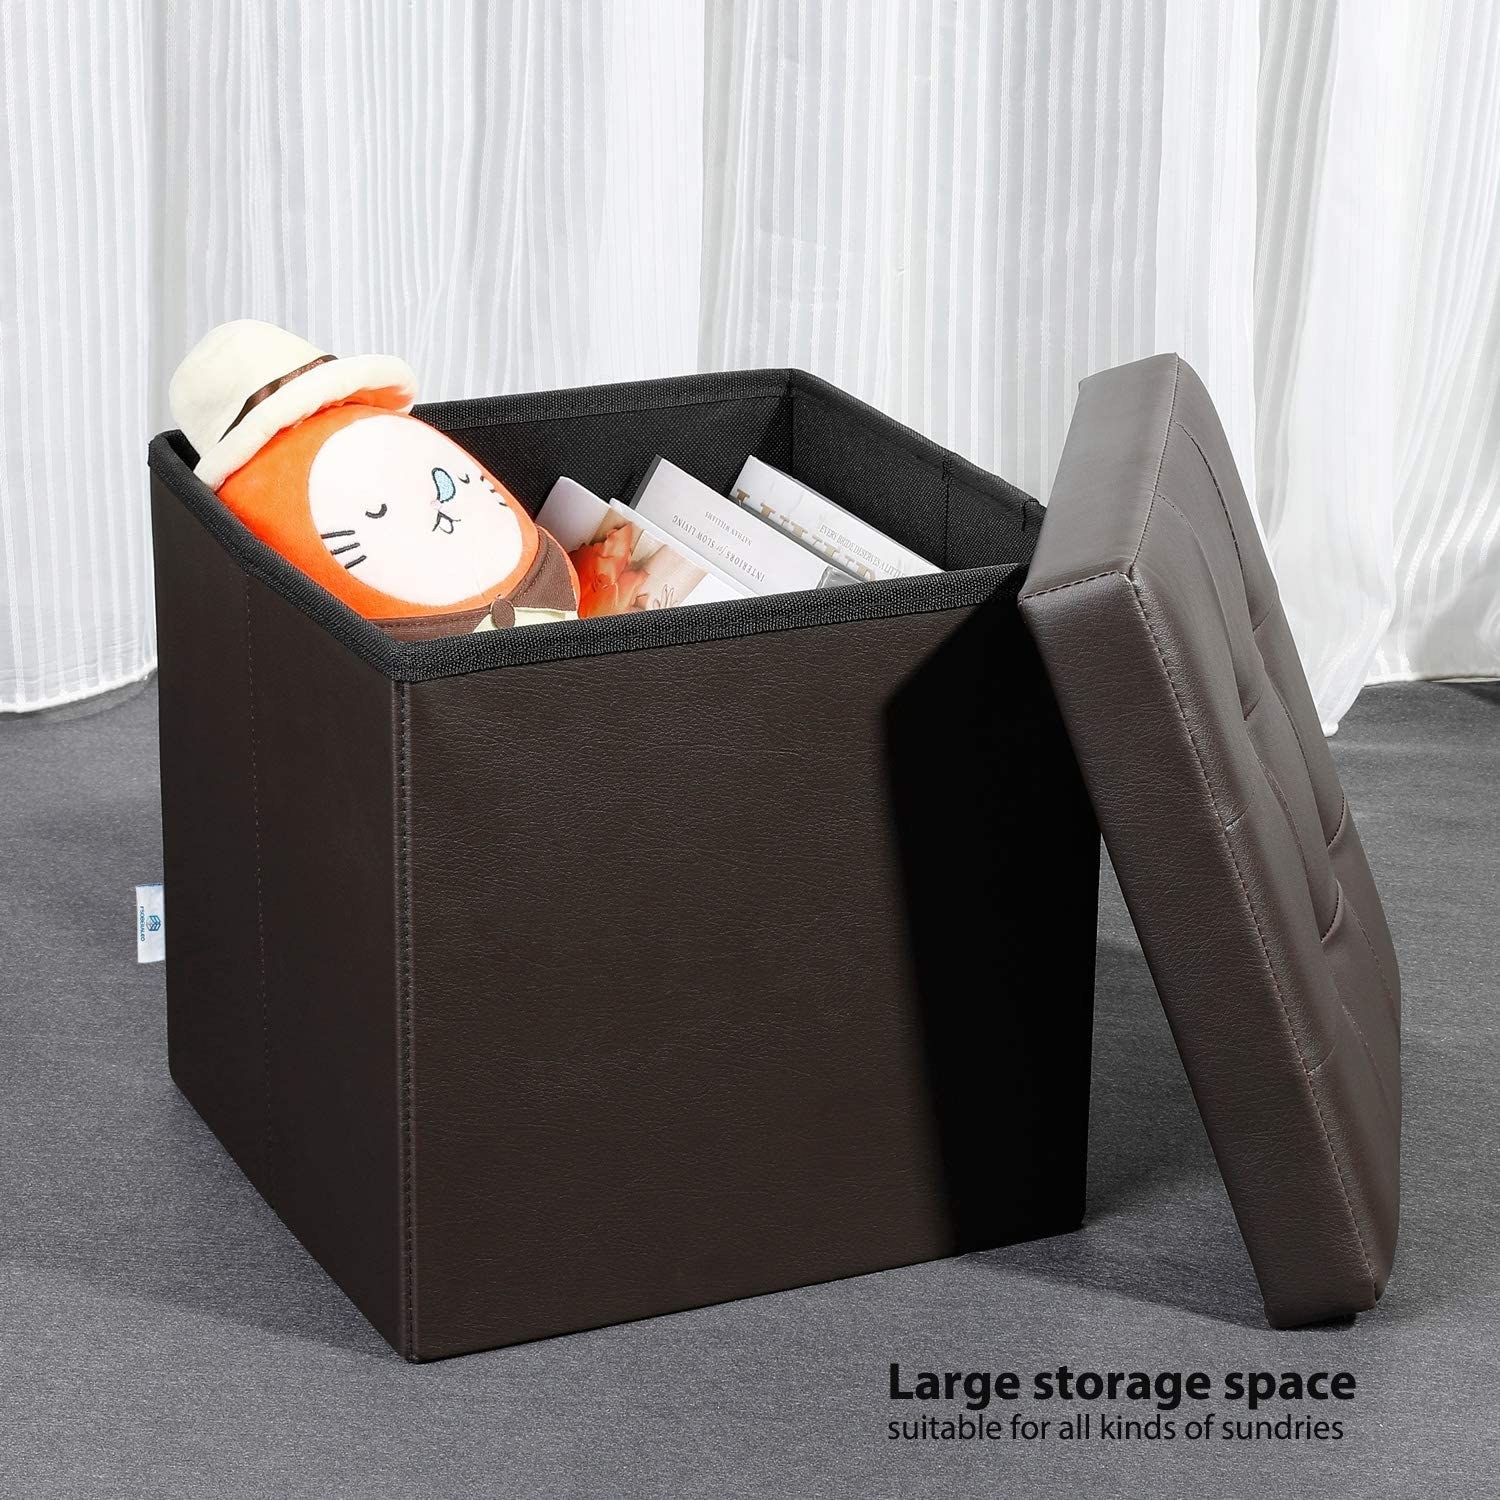 The storage ottoman in brown.